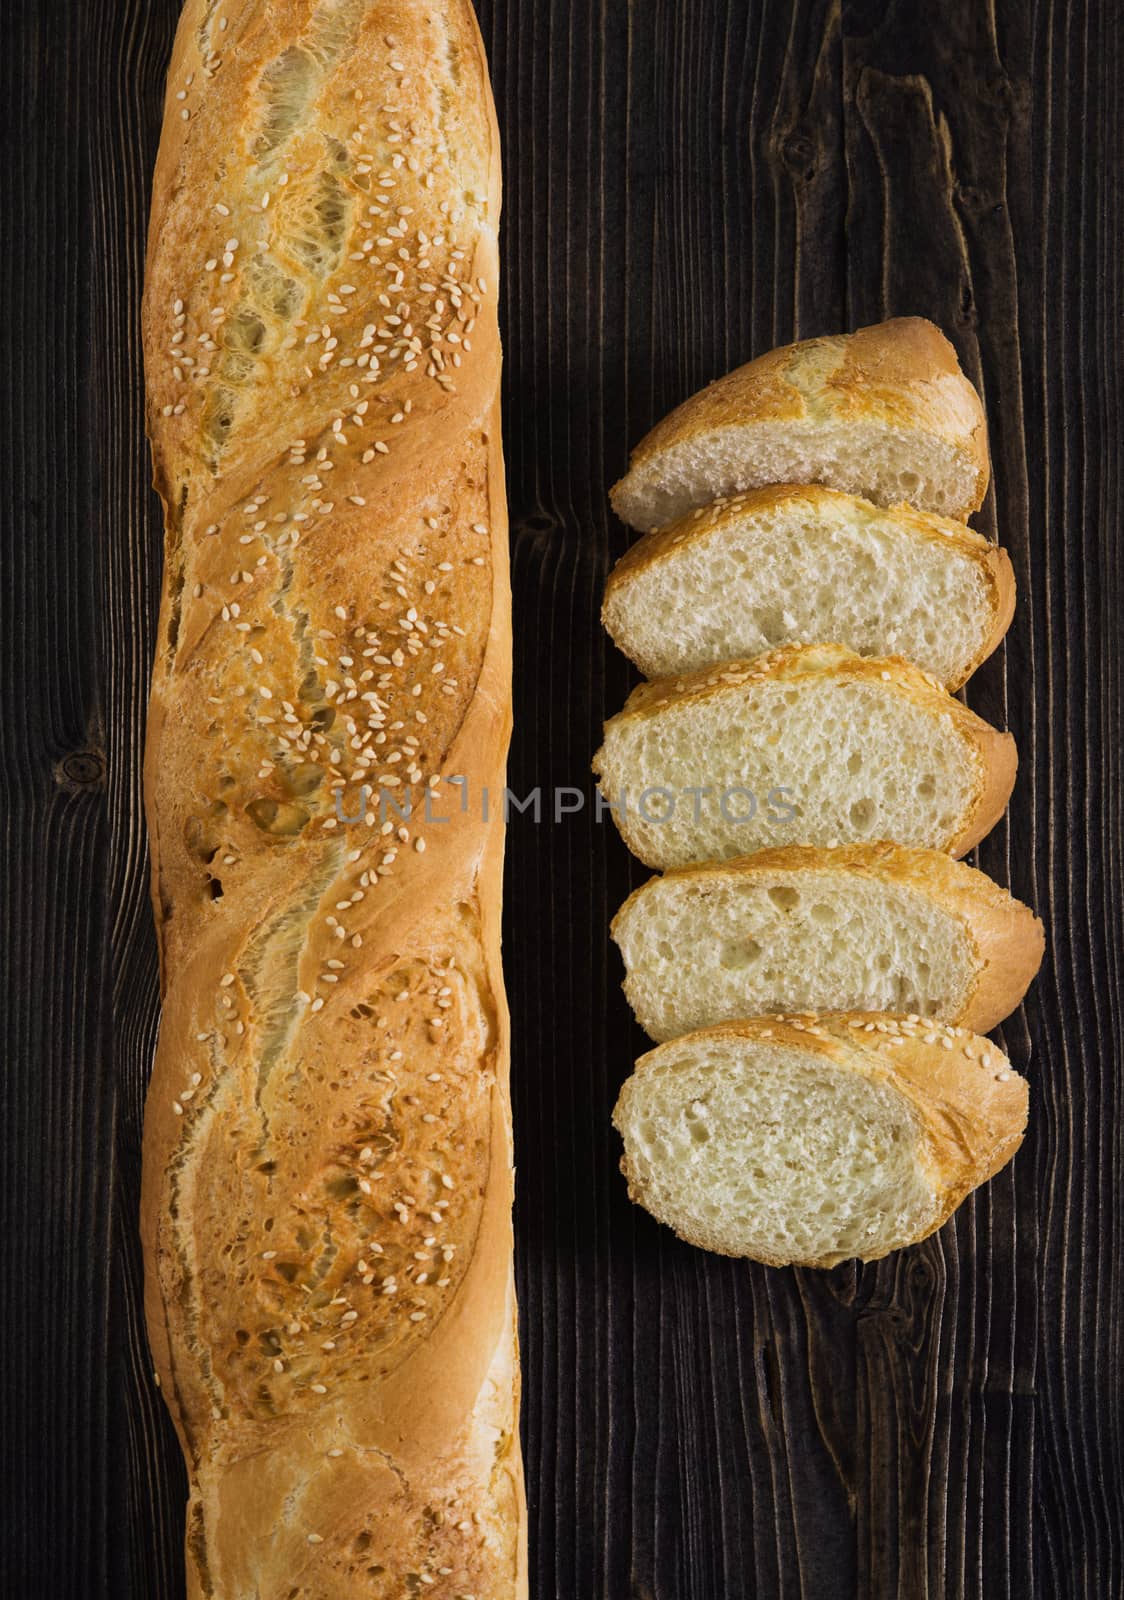 Top view of a sliced of baguette, dark wooden background